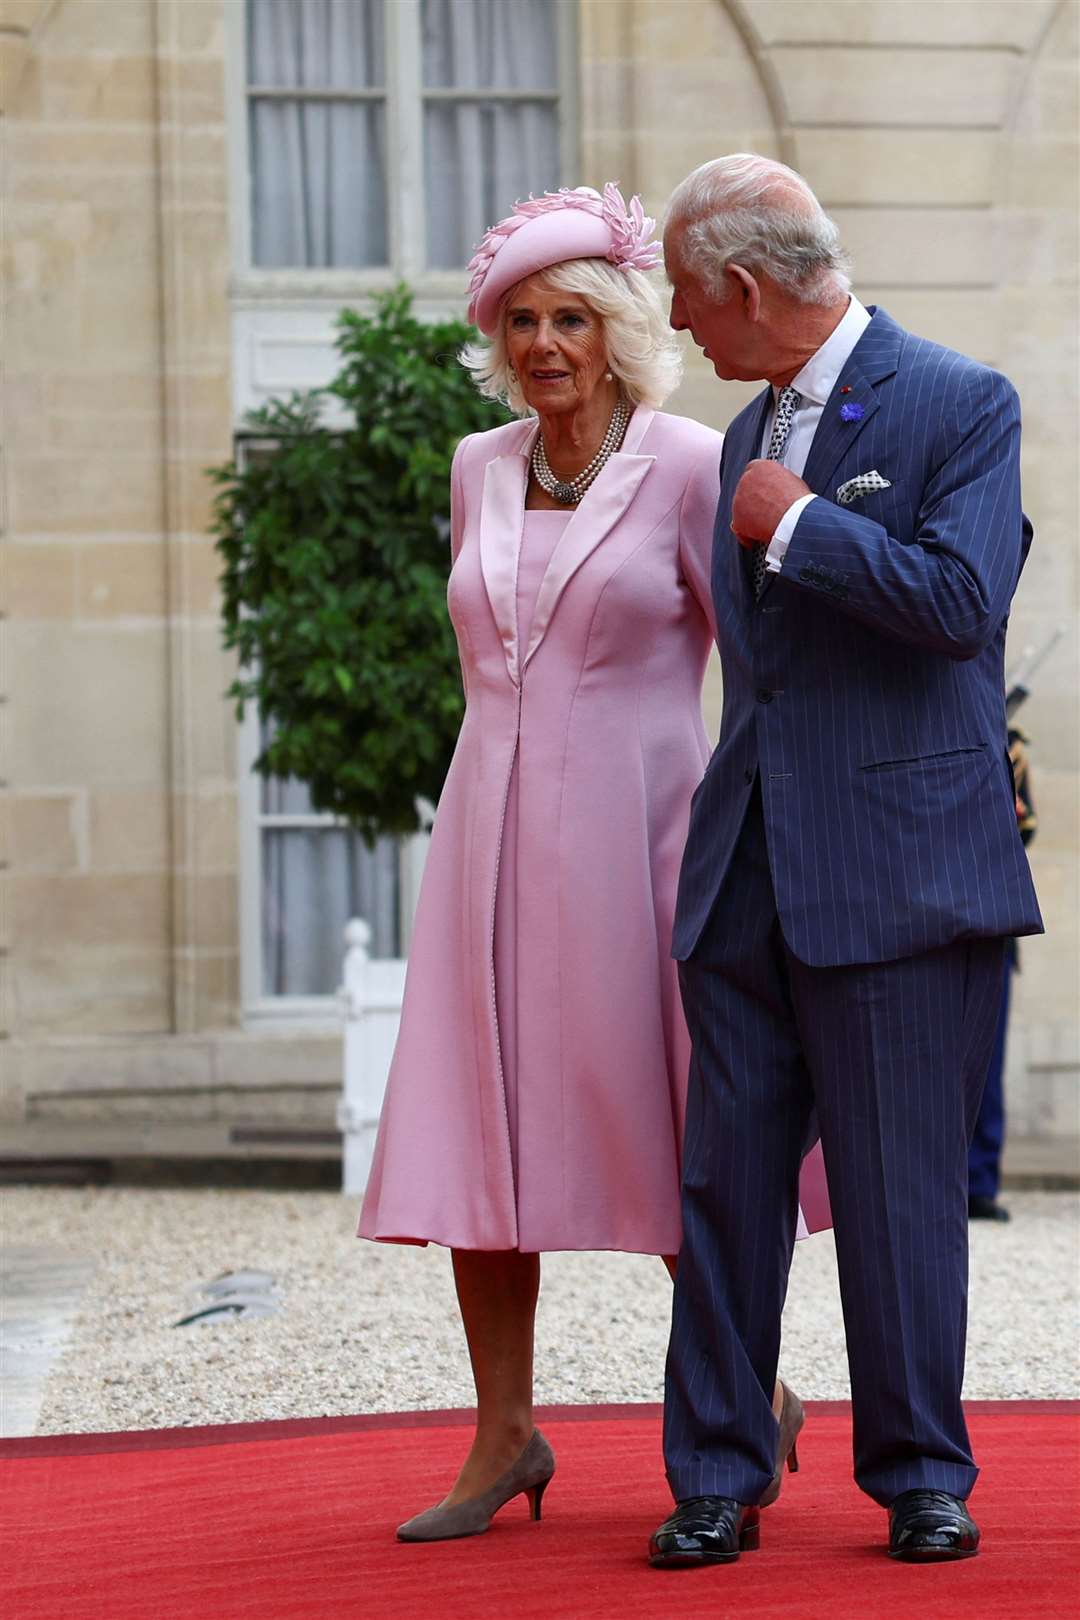 The King and Queen arrive at the palace (Hannah McKay/PA)